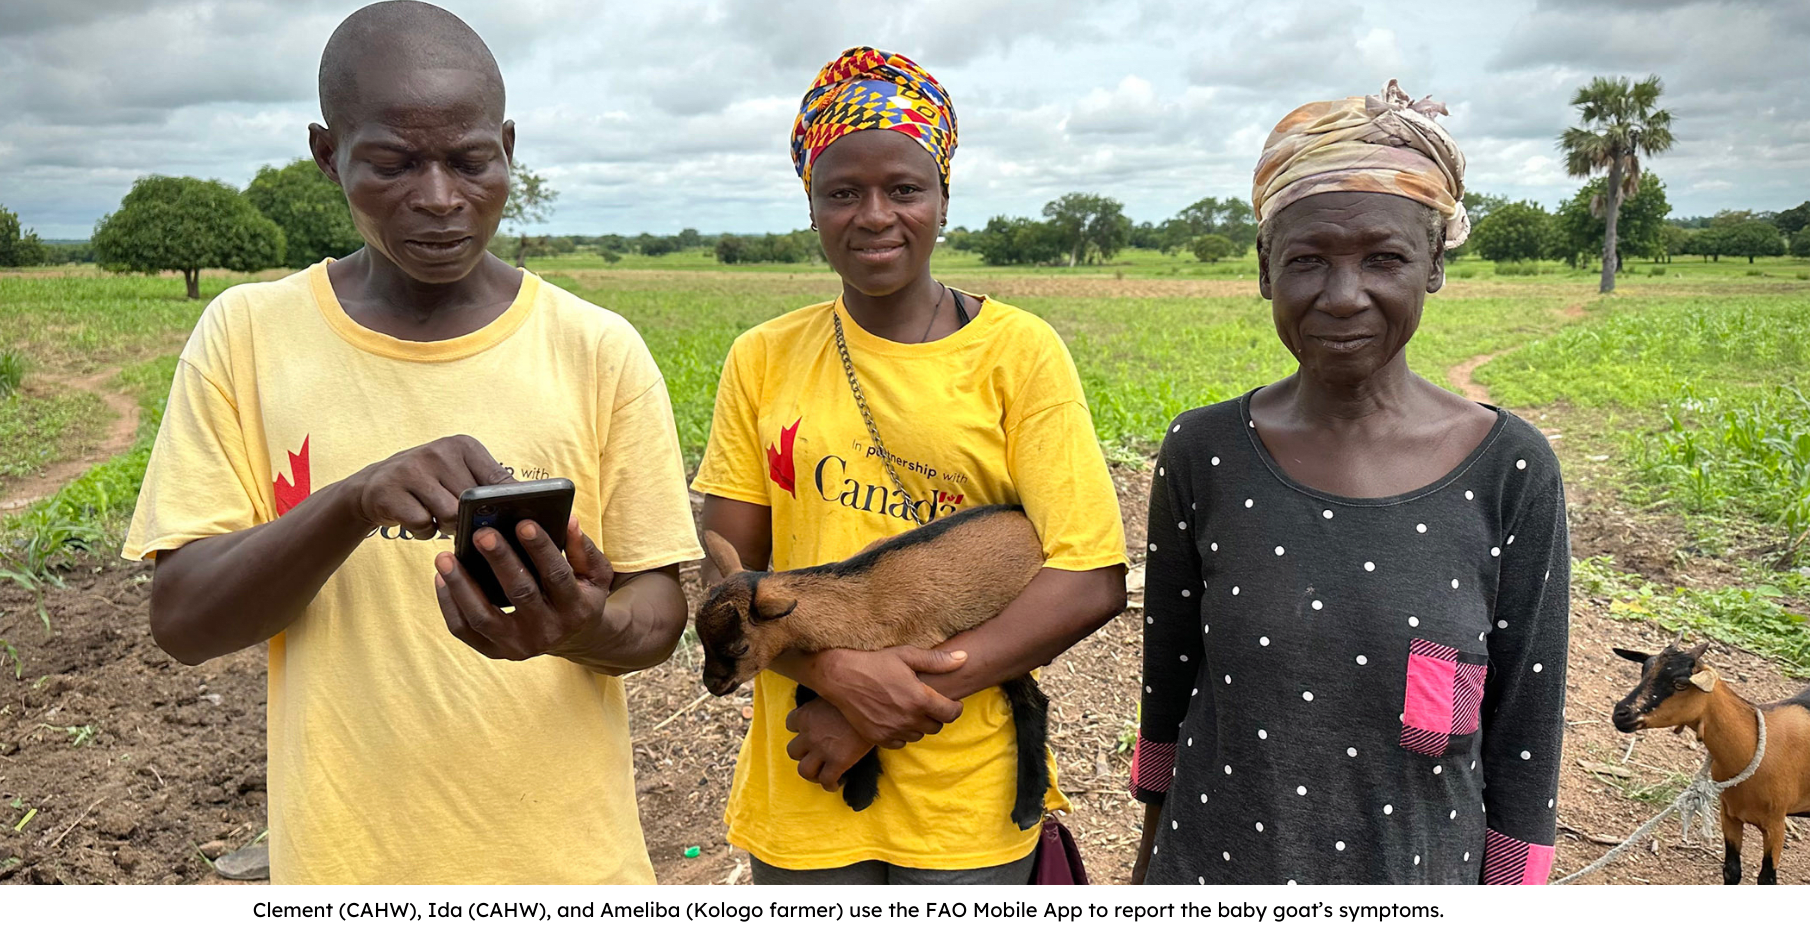 Clement (CAHW), Ida (CAHW, and Ameliba (Kologo farmer) use the FAO Mobile App to report the baby goat’s symptoms.